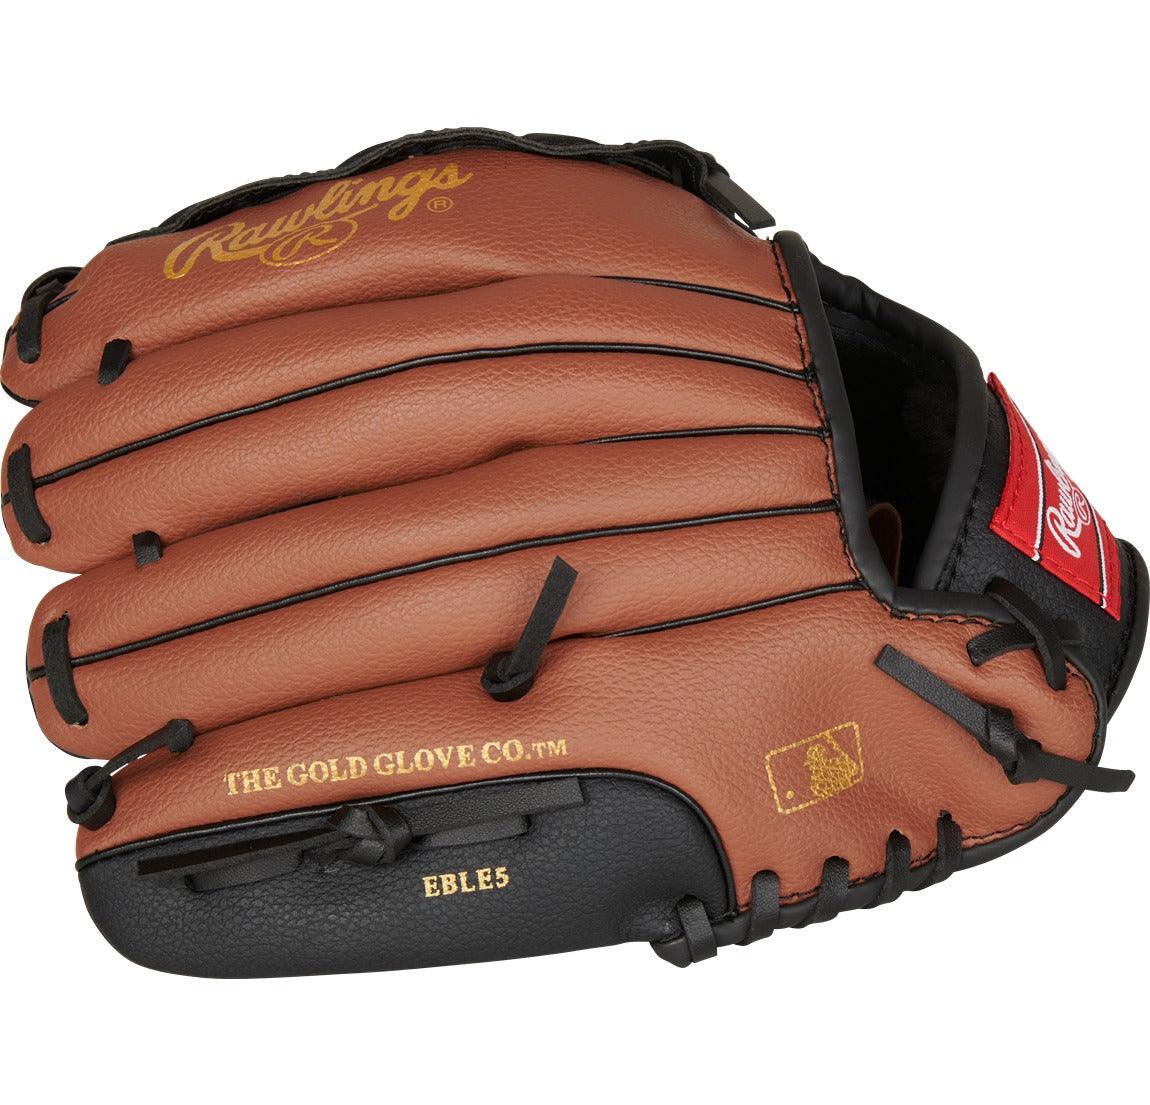 Players 10.5" Baseball Glove - Youth - Sports Excellence